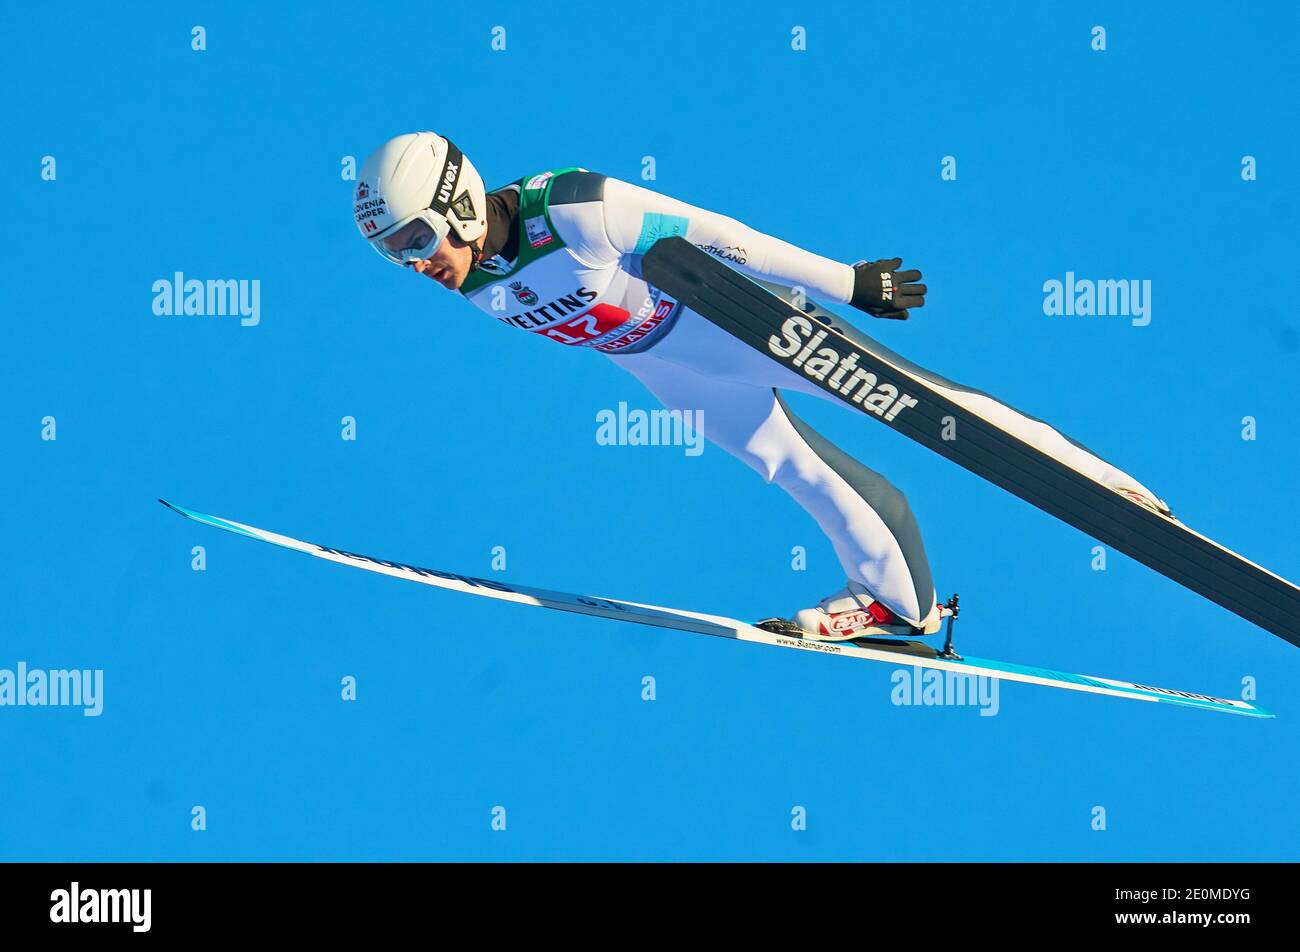 Mackenzie BOYD-CLOWES, CAN in action at the Four Hills Tournament Ski Jumping at Olympic Stadium, Grosse Olympiaschanze in Garmisch-Partenkirchen, Bavaria, Germany, January 01, 2021.  © Peter Schatz / Alamy Live News Stock Photo